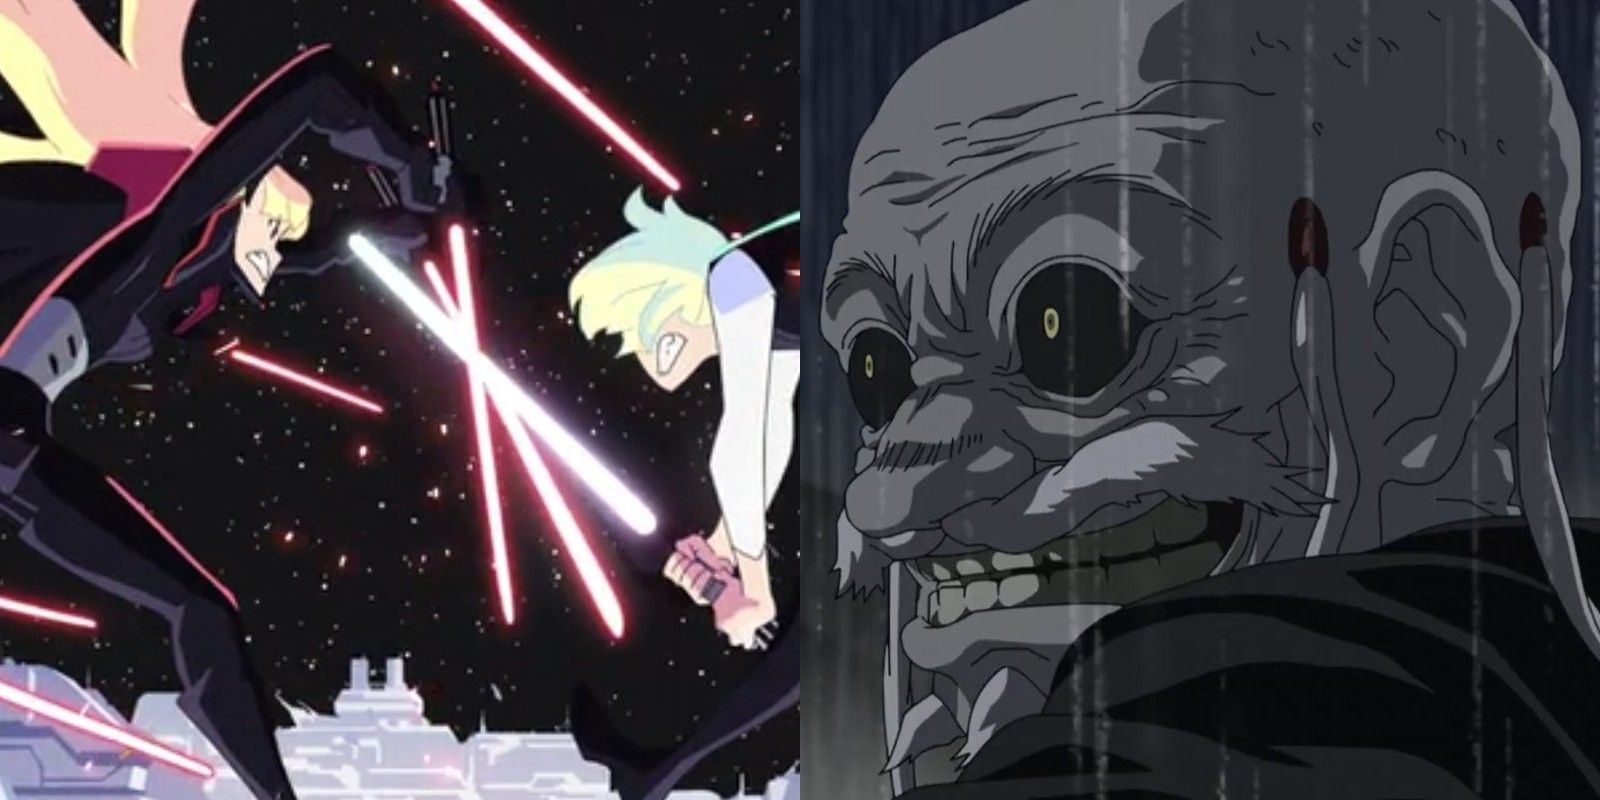 Star Wars: Visions' The Twins and The Elder both came from Studio Trigger